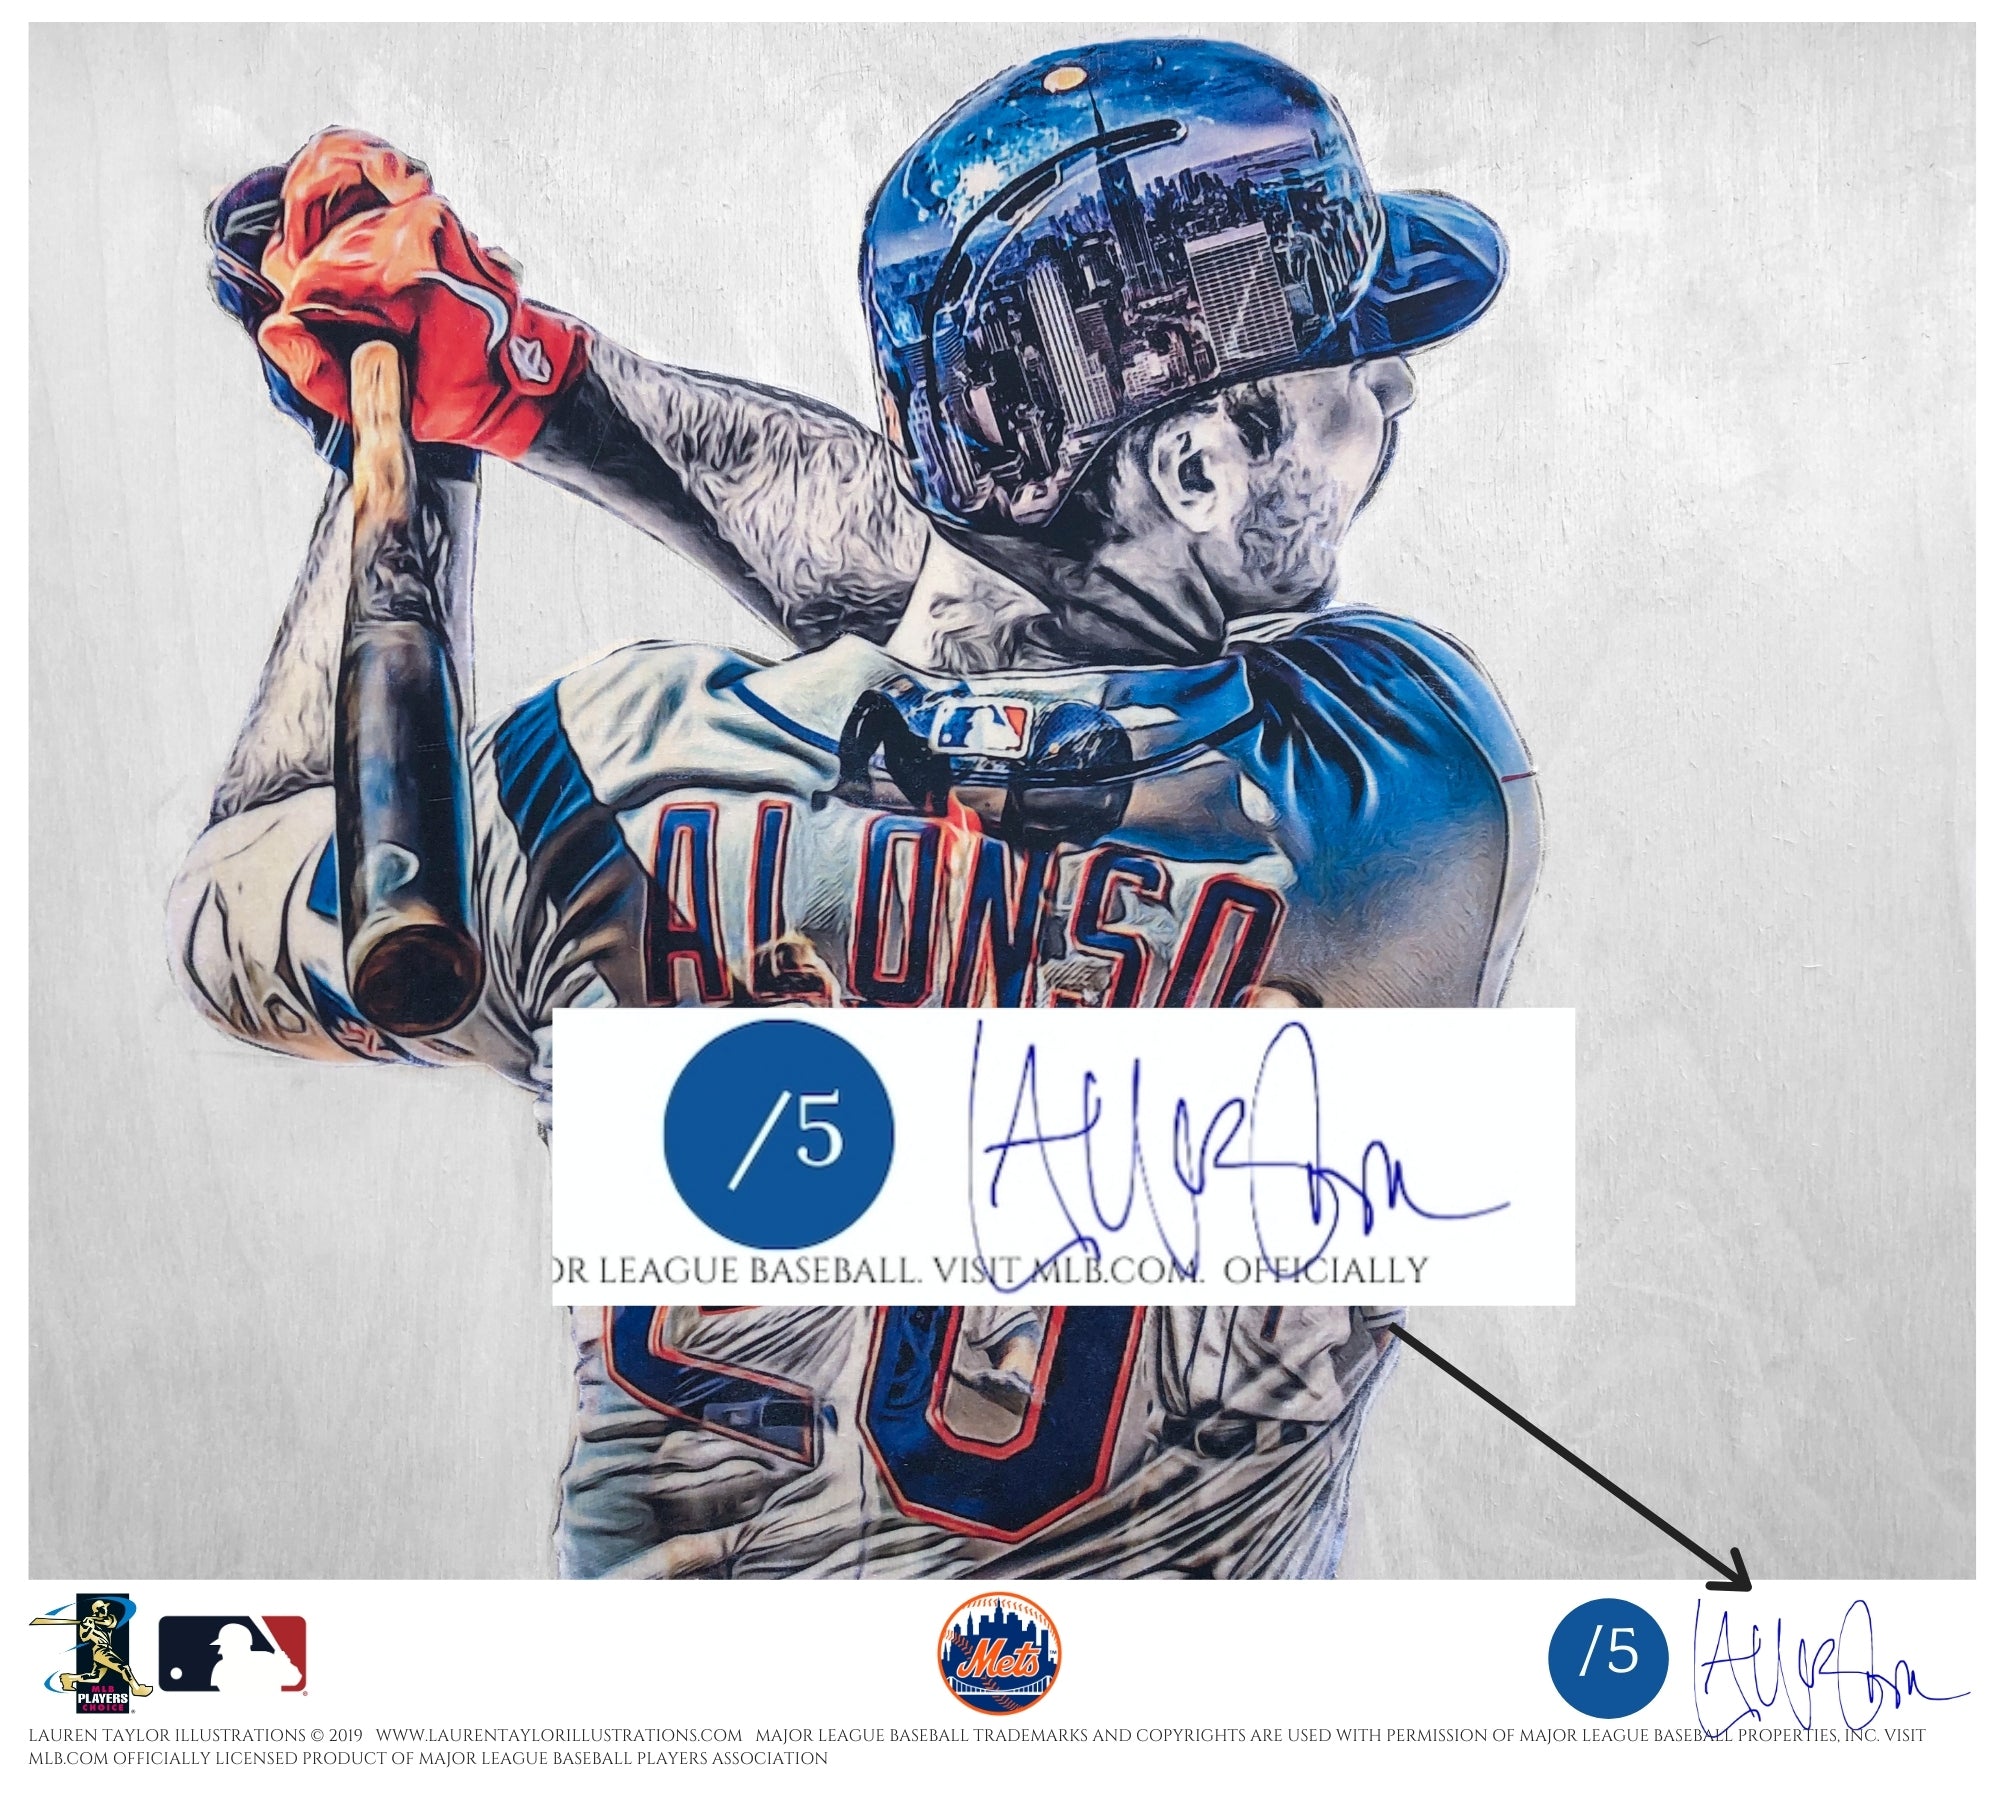 See the Colorful, Artist-Designed Bat That Mets Star Pete Alonso